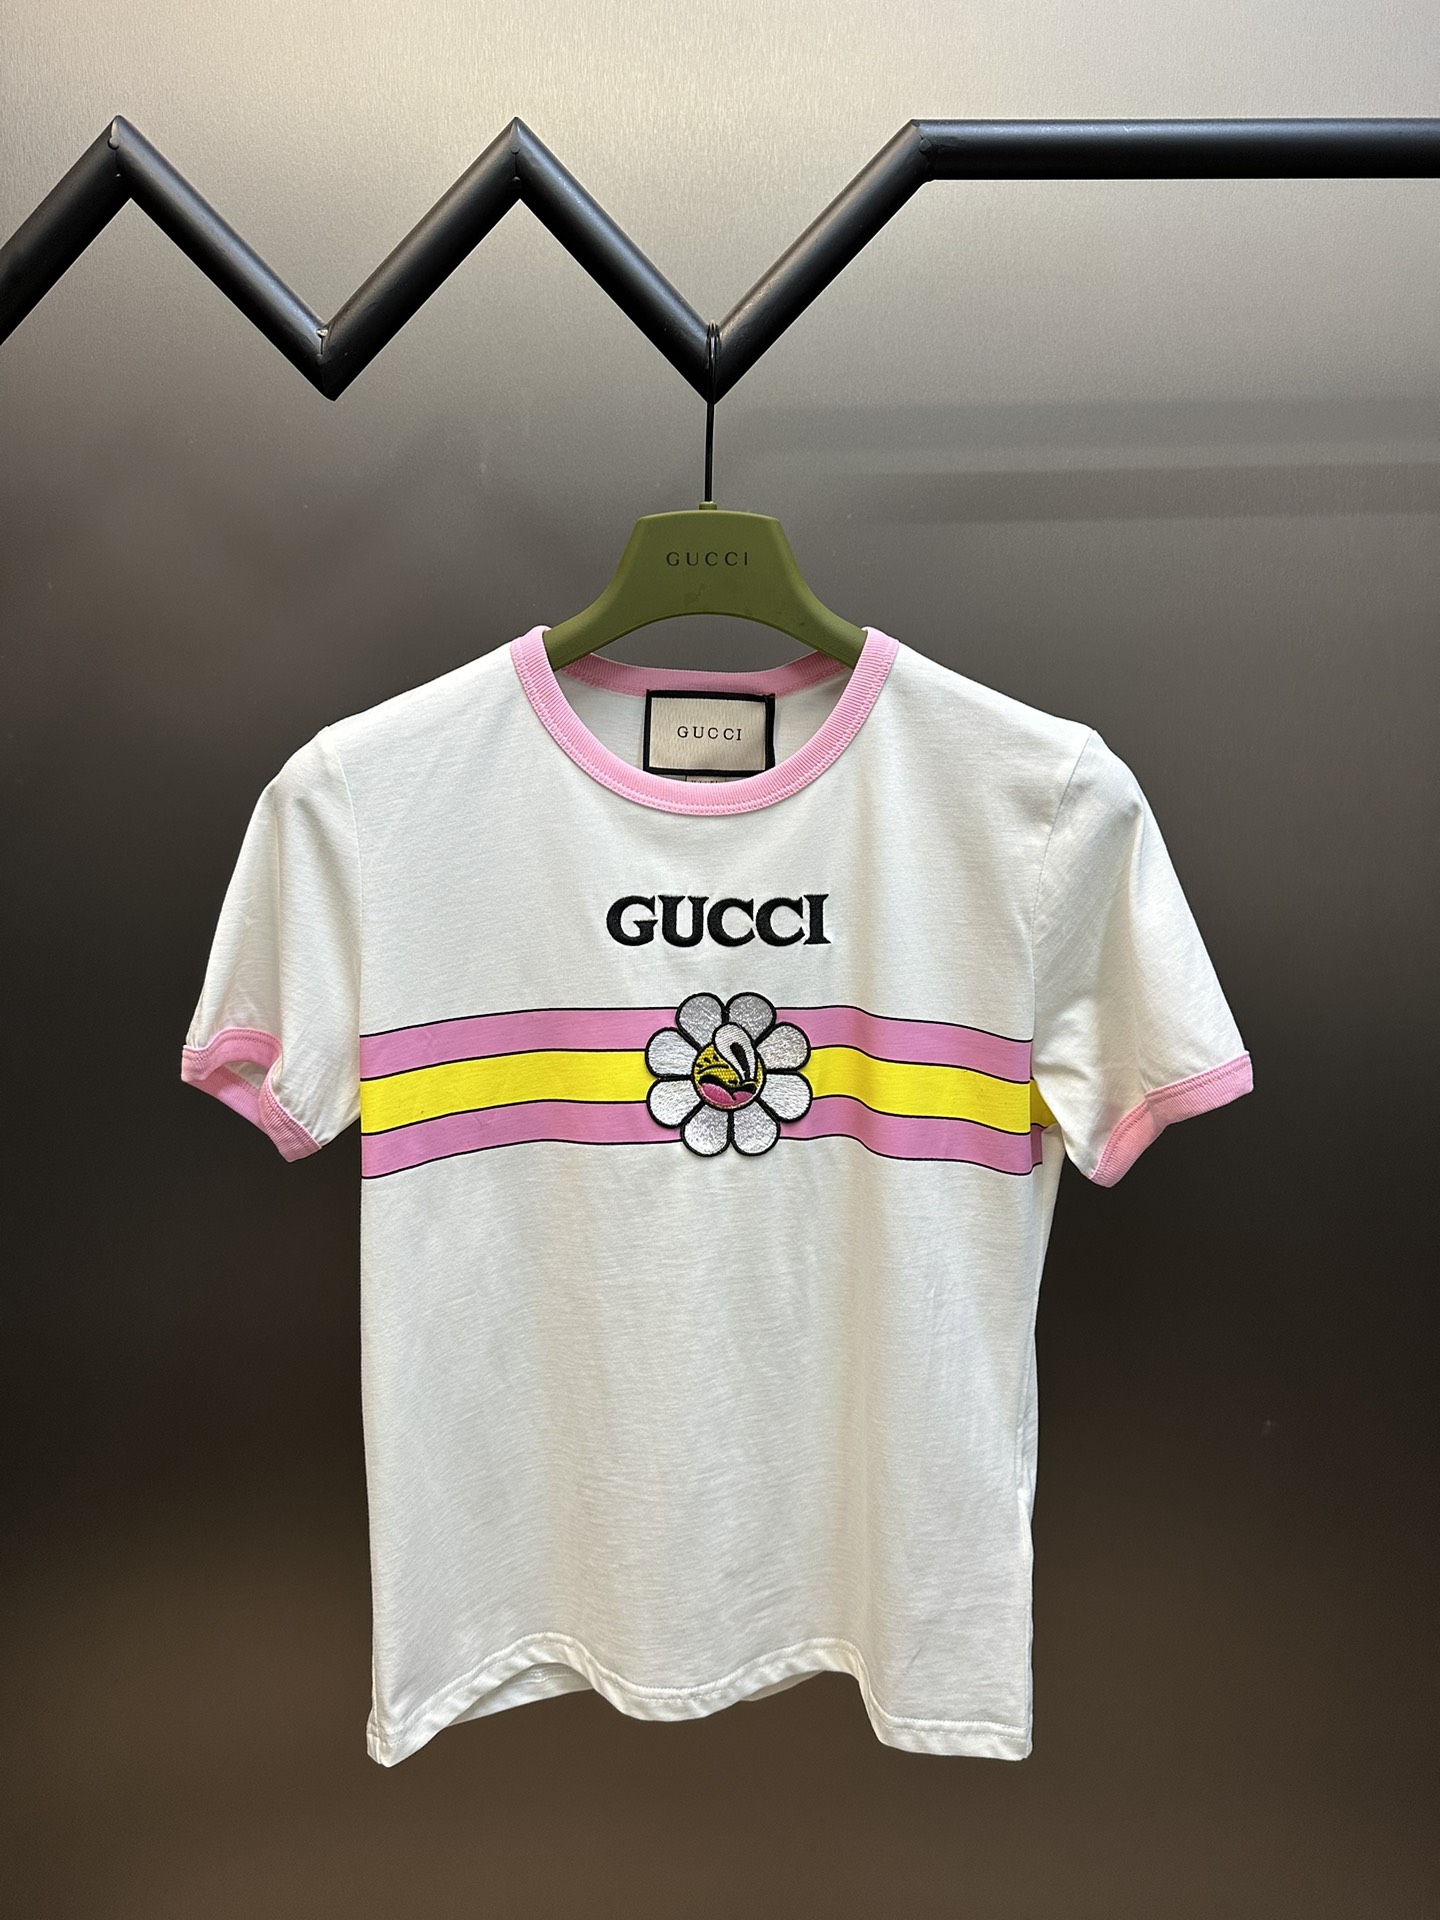 Gucci Clothing T-Shirt Pink White Embroidery Women Cotton Short Sleeve